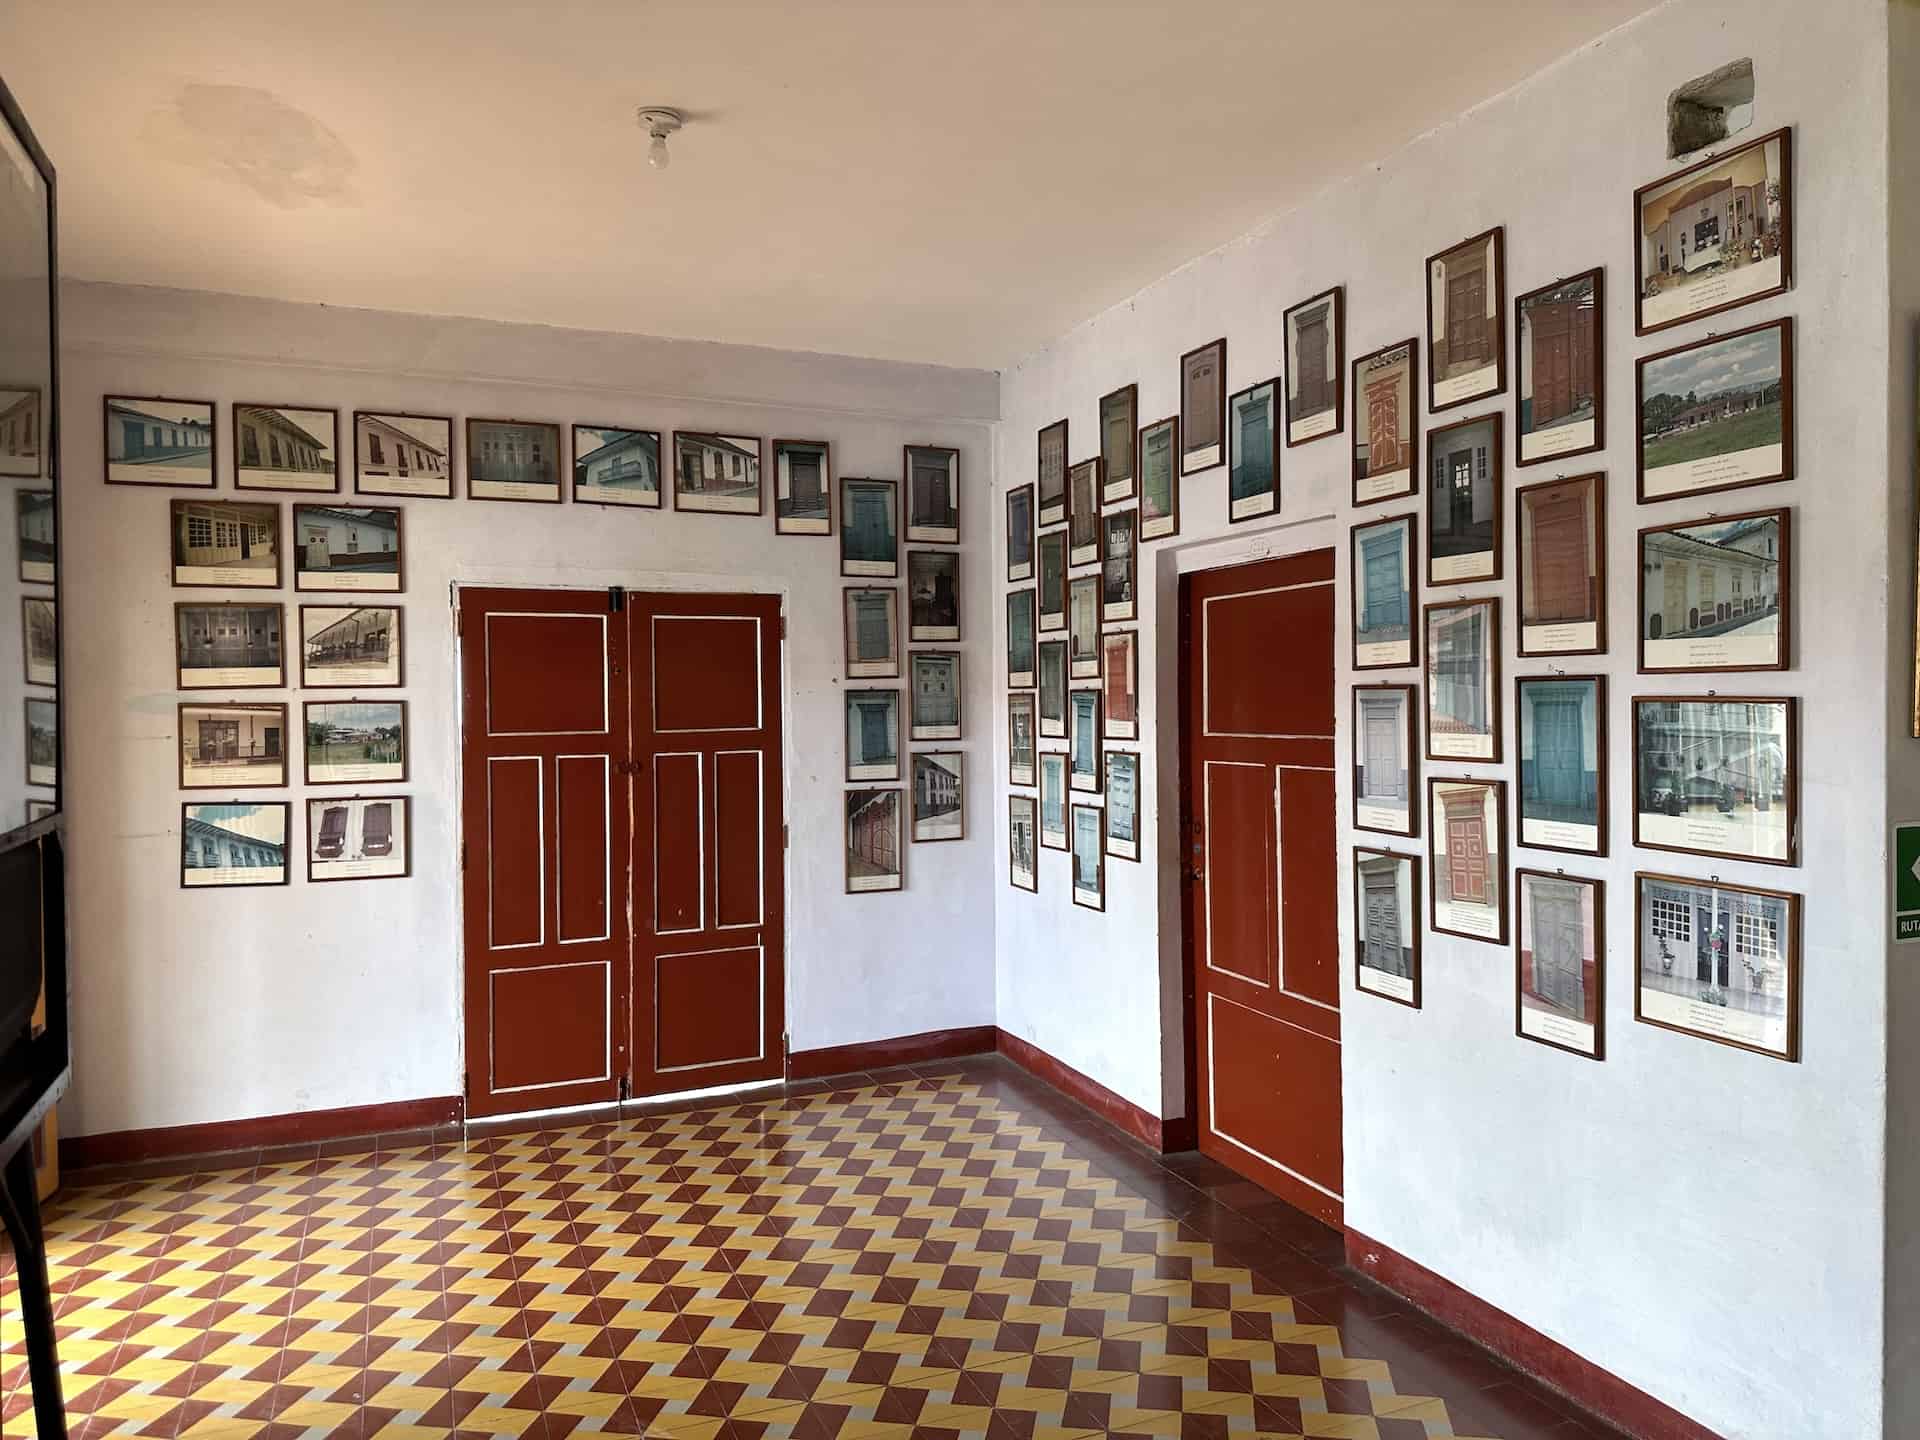 Photos of doors and buildings at the Museum of Aguadas Traditions